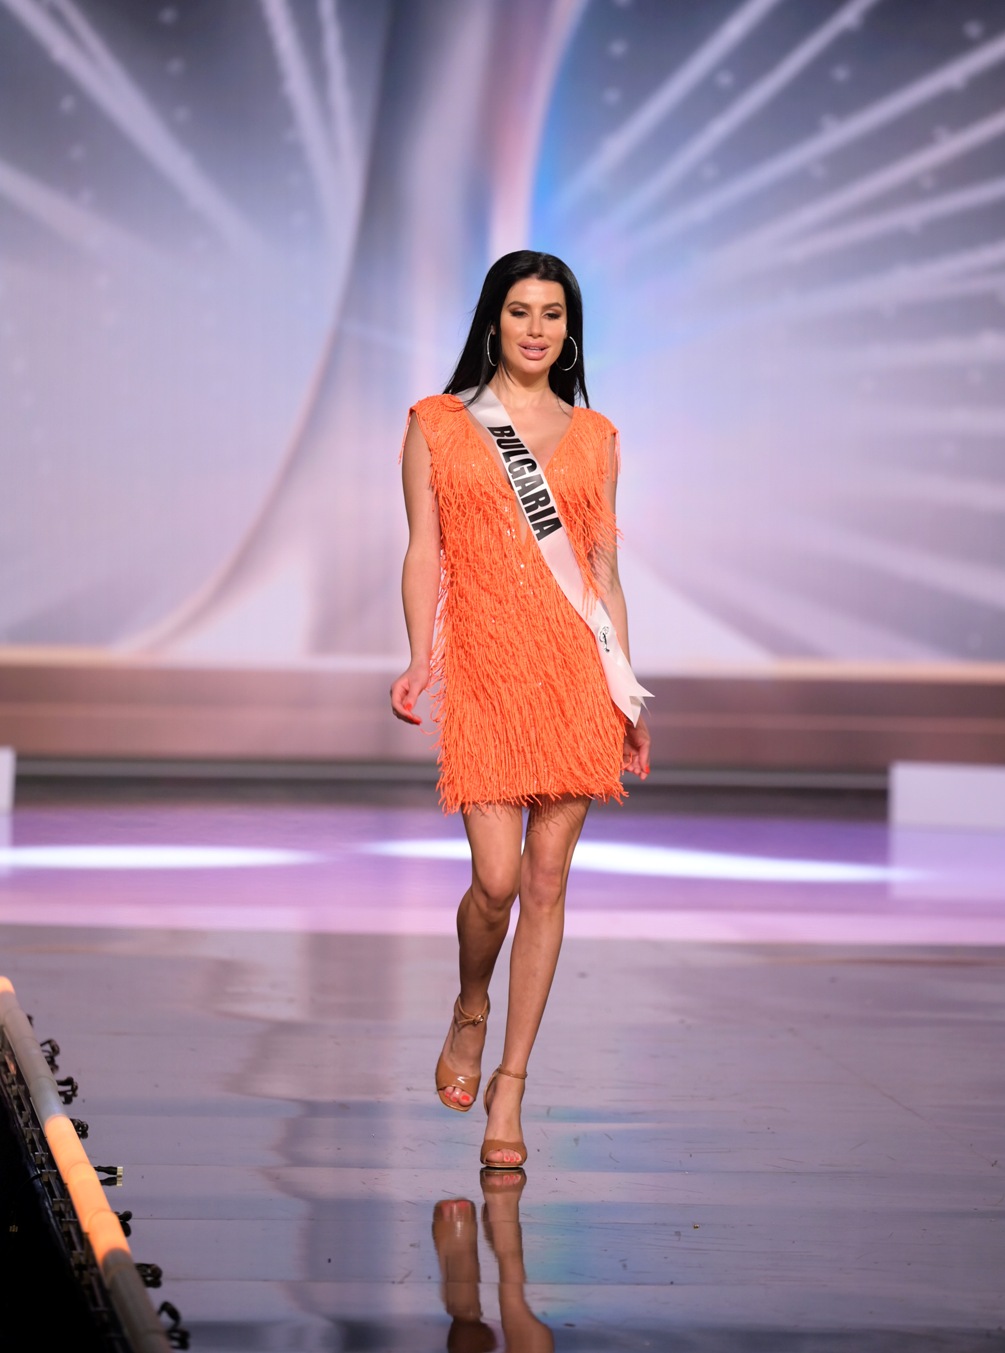 Radinela Chusheva, Miss Universe Bulgaria 2020 on stage in fashion by Sherri Hill during the opening of the MISS UNIVERSE® Preliminary Competition at the Seminole Hard Rock Hotel & Casino in Hollywood, Florida on May 14, 2021. Tune in to the live telecast on FYI and Telemundo on Sunday, May 16 at 8:00 PM ET to see who will become the next Miss Universe.